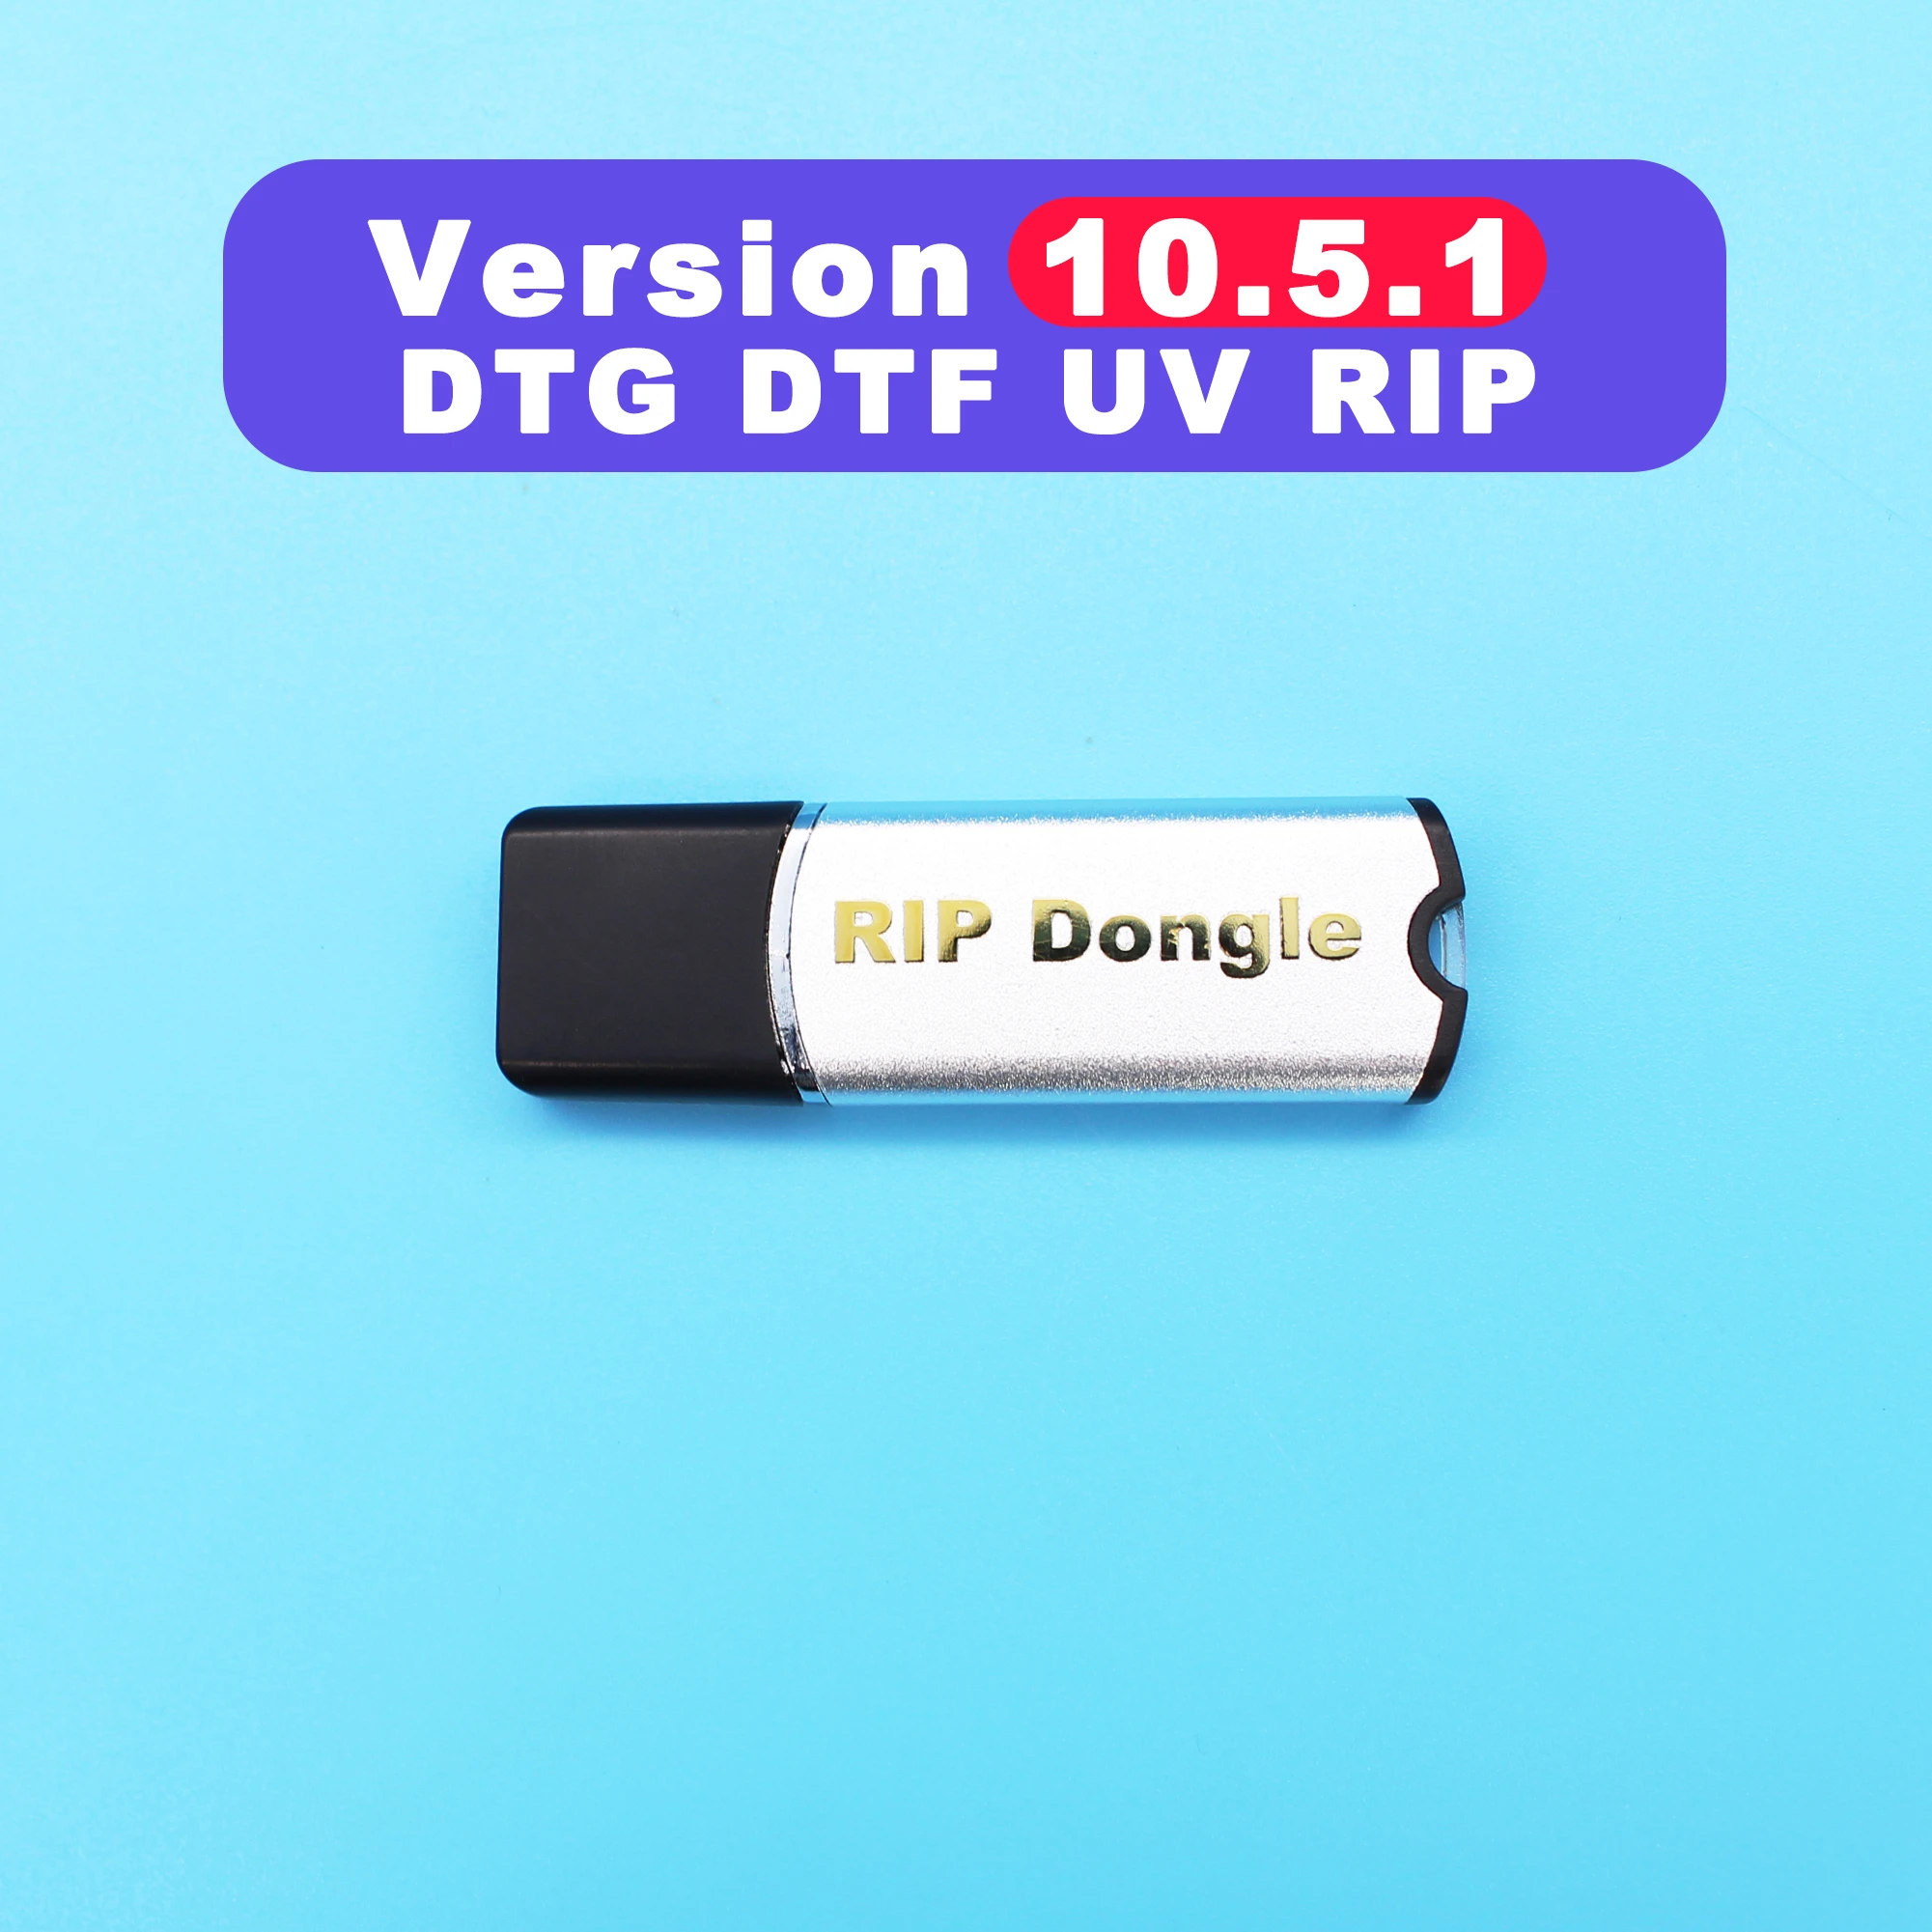 DTF RIP 10.5.1 Software DTG Software RIP Dongle Key For Epson L805 L800 R1390 L1800 R2000 4880 7880 P6000 DTF Acro 10.5 RIP paper pickup roller